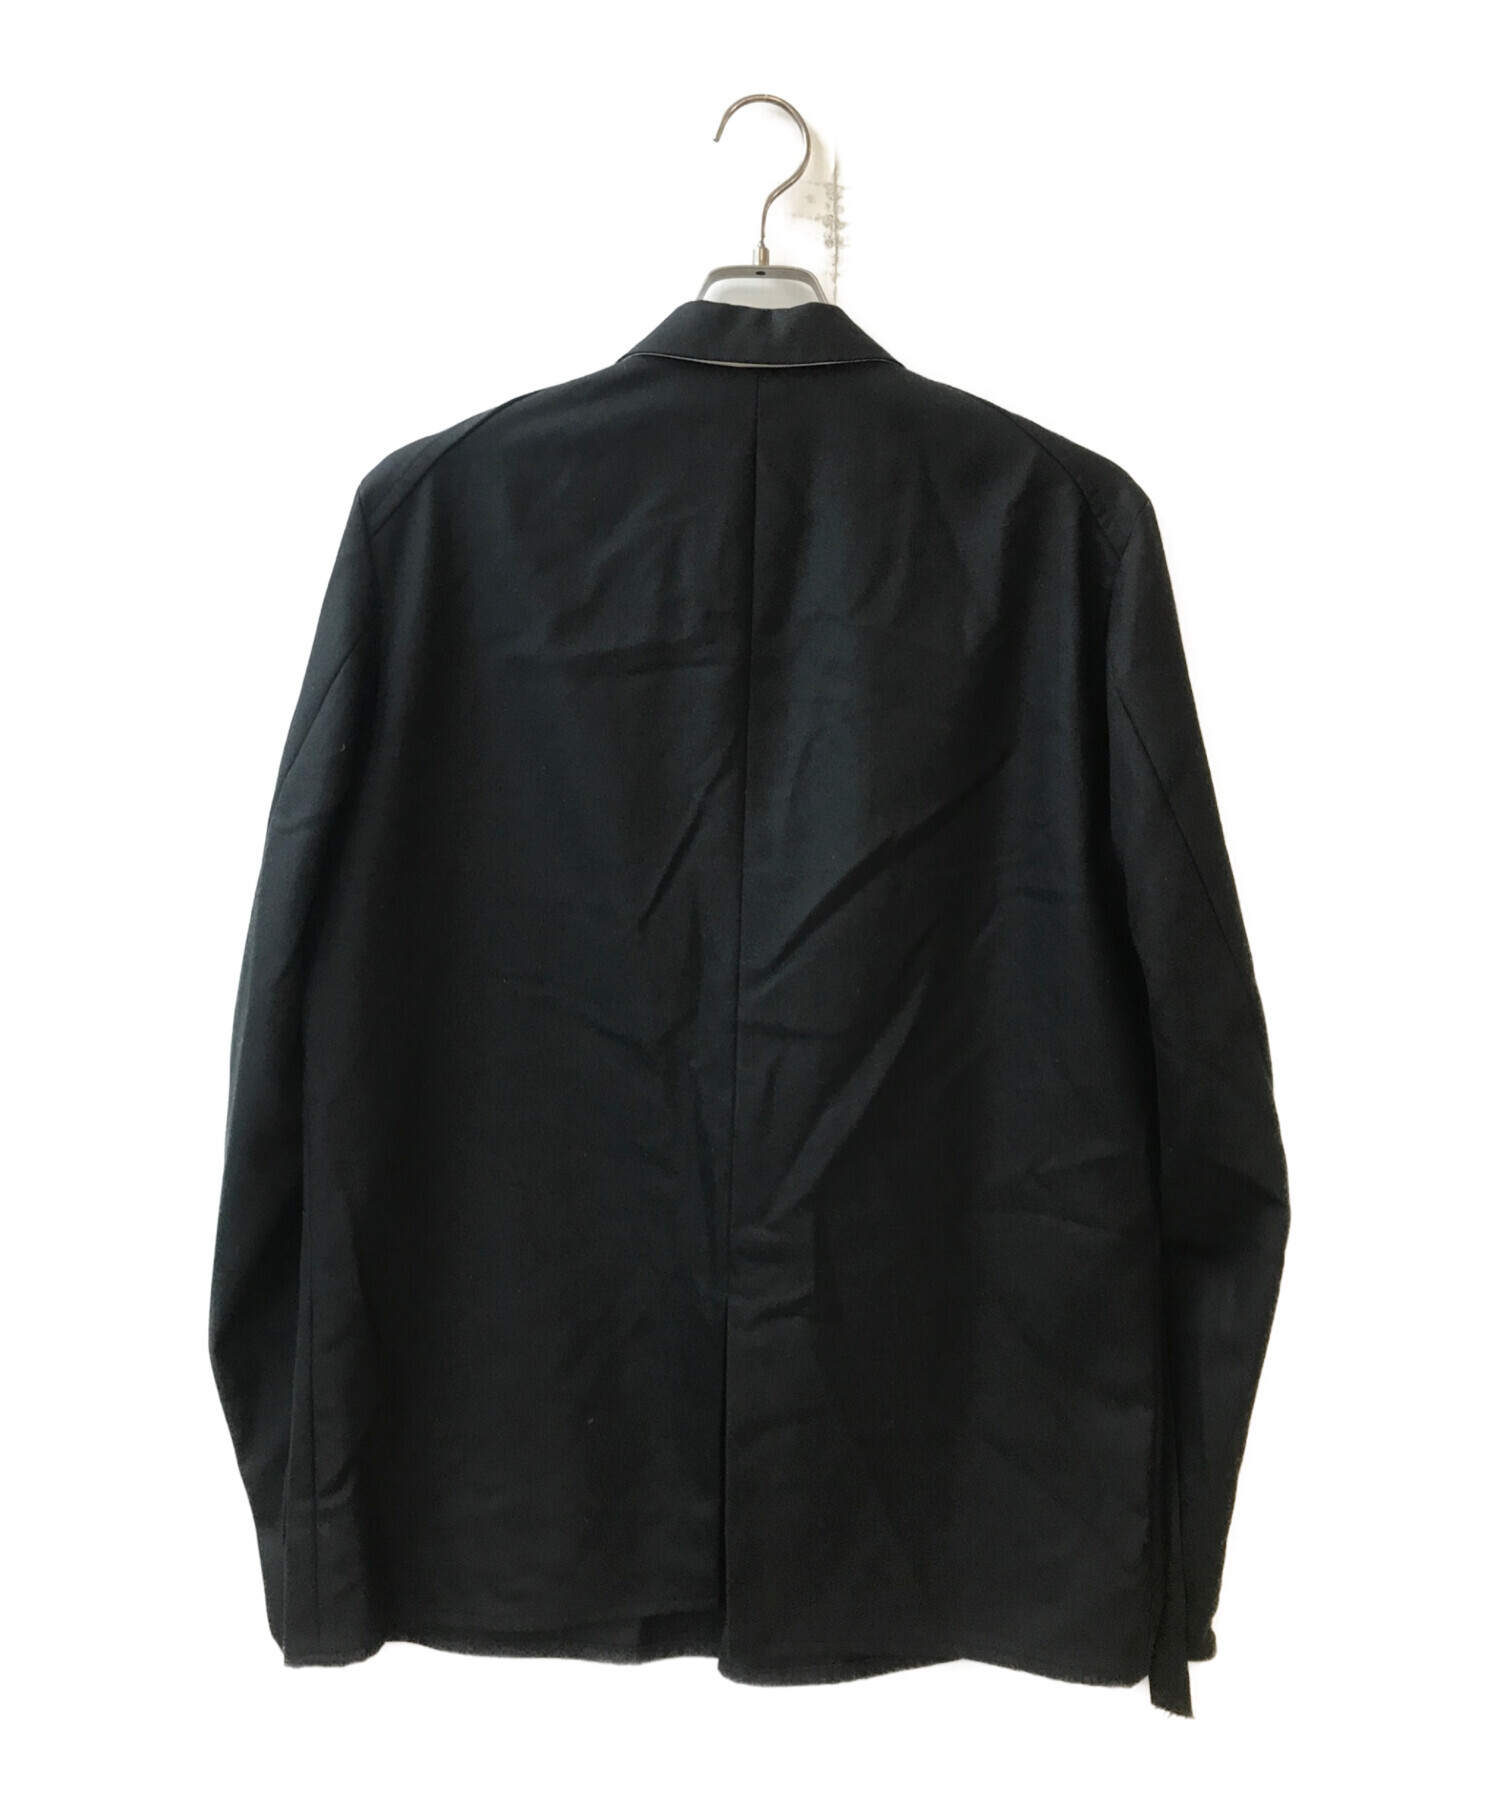 SUNSEA (サンシー) N.M THICKENED DOUBLE BREASTED JACKET ブラック サイズ:3